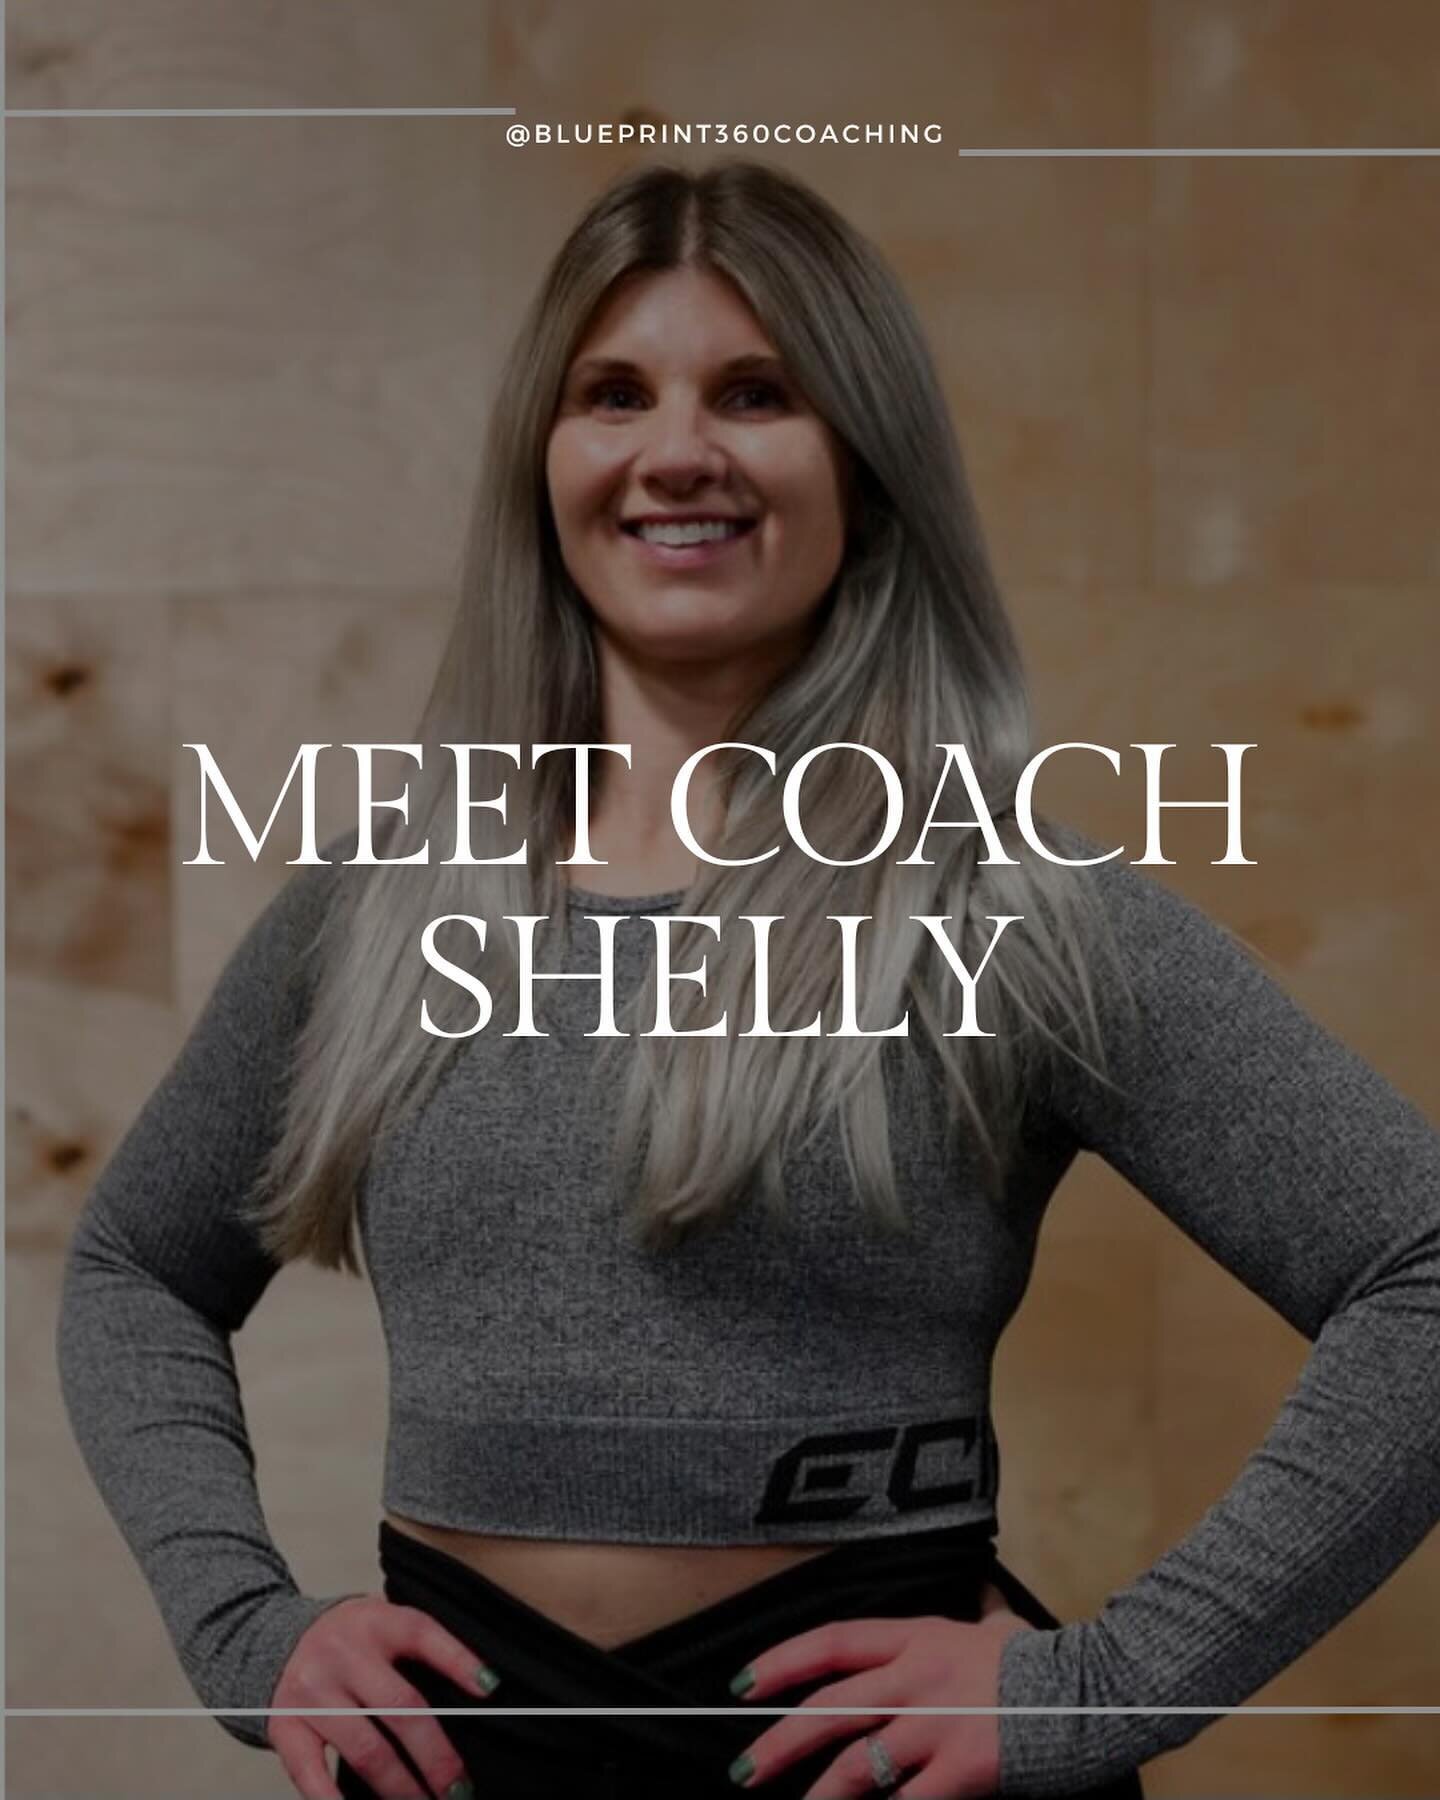 Get to know Coach, Shelly! 

And follow her for more tips on Women's health and wellness! 🖤 @coach_shelly_lynn 

#blueprint360coaching #womenshealthmatters #womenshealthcoach #weightlosscoachforwomen